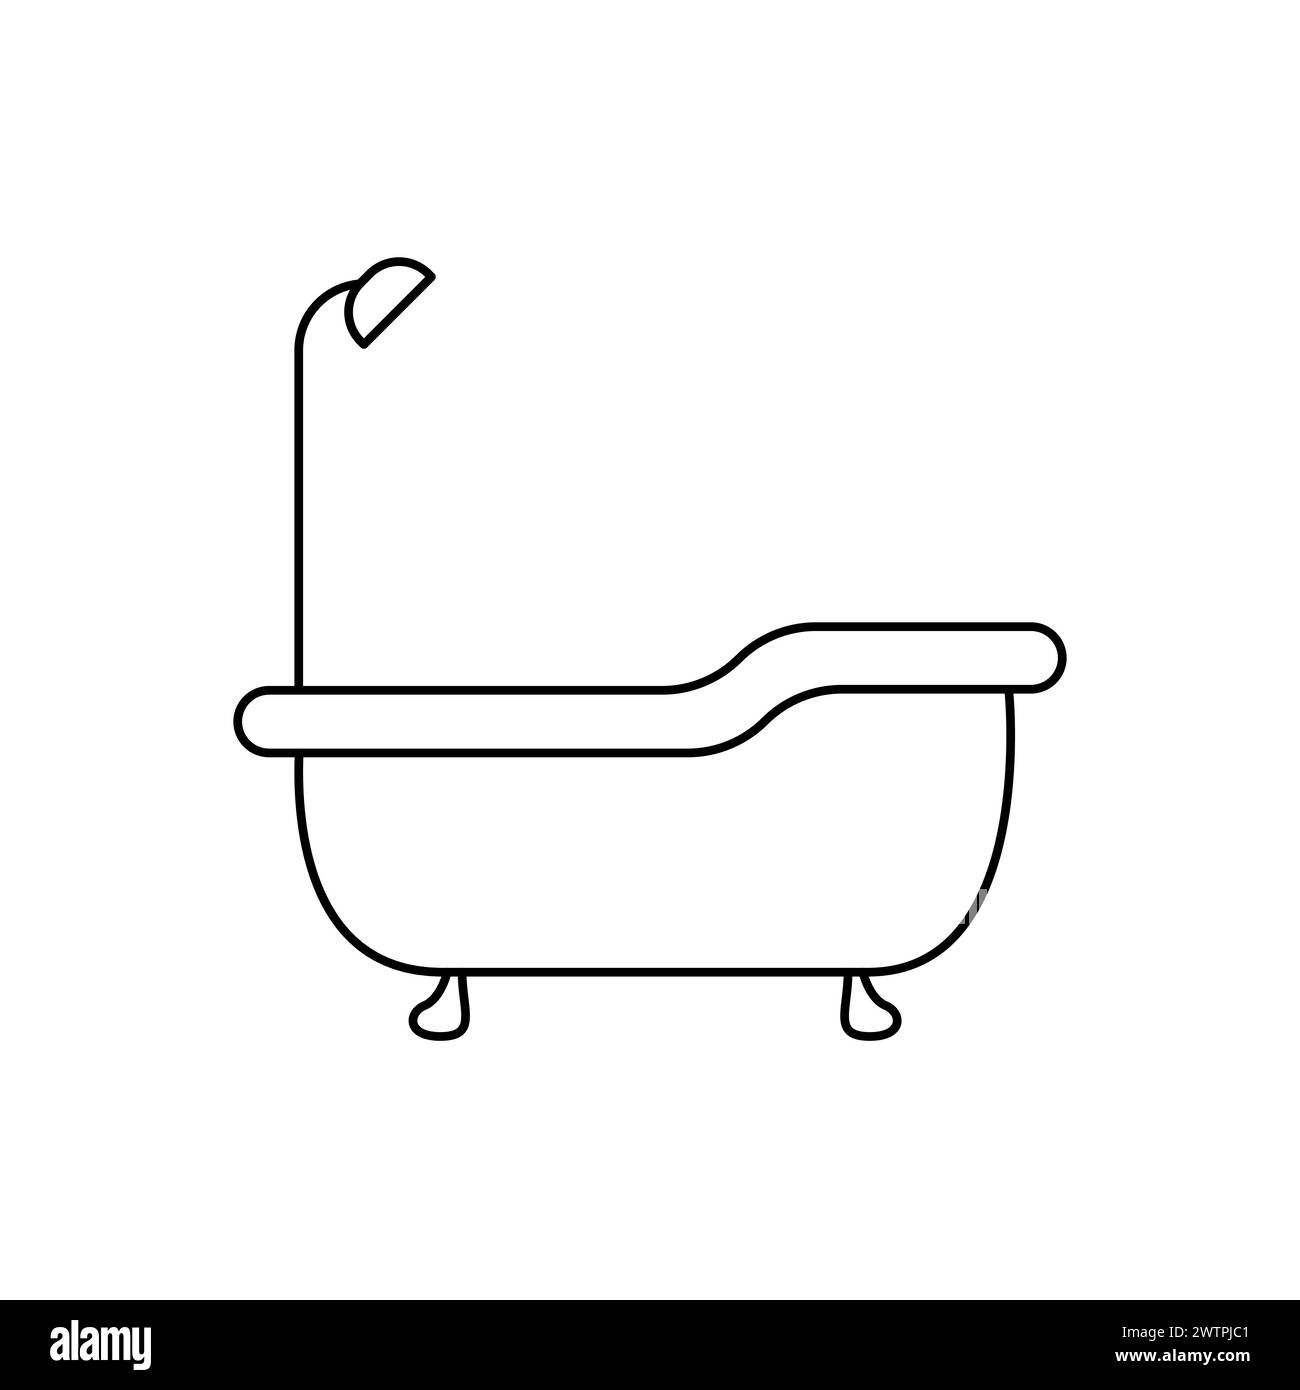 Outline shower logo vector. Concept of bathing and washing icon. Ceramic bathtub in a simple style. Concept for applications bath symbol for web desig Stock Vector